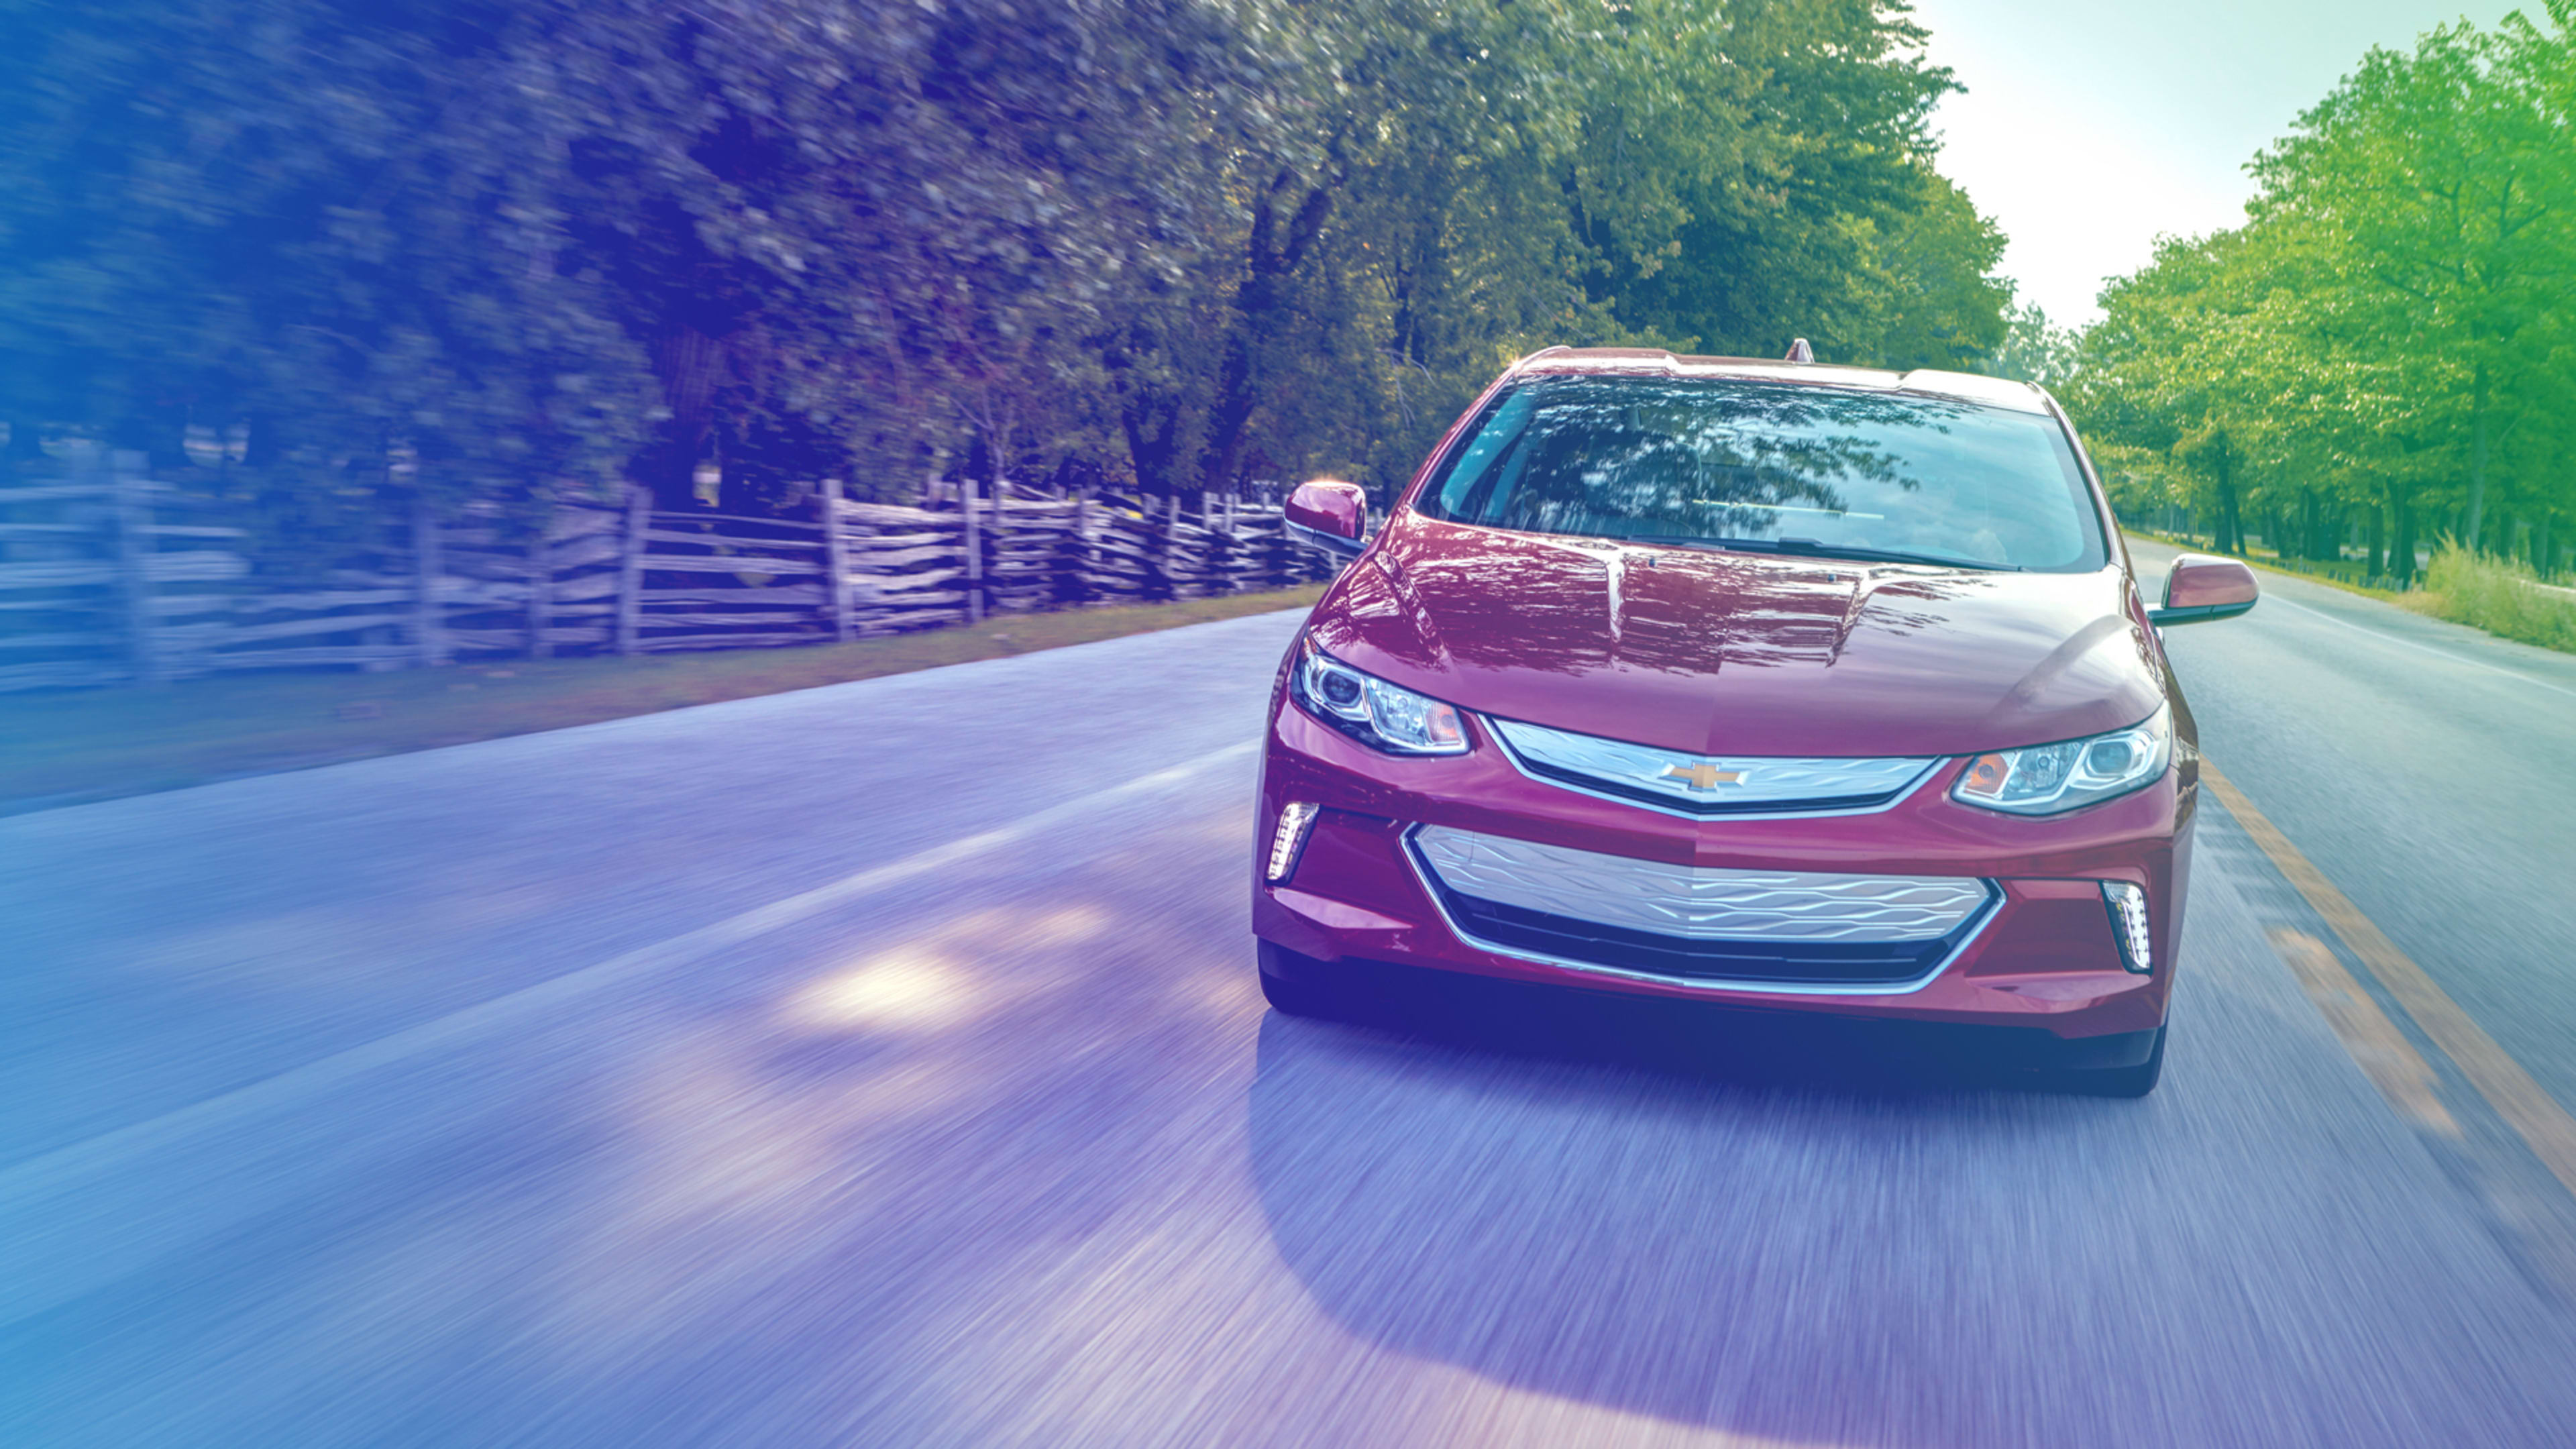 Goodbye, Chevy Volt: In the age of Tesla, GM retires its hybrid electric car